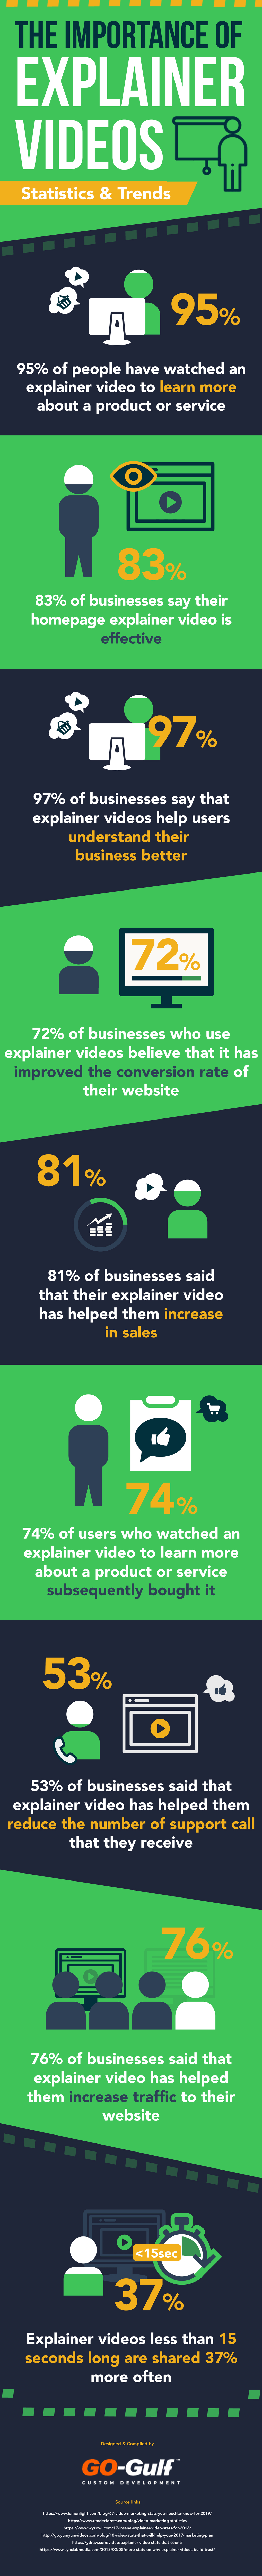 Importance of Explainer videos